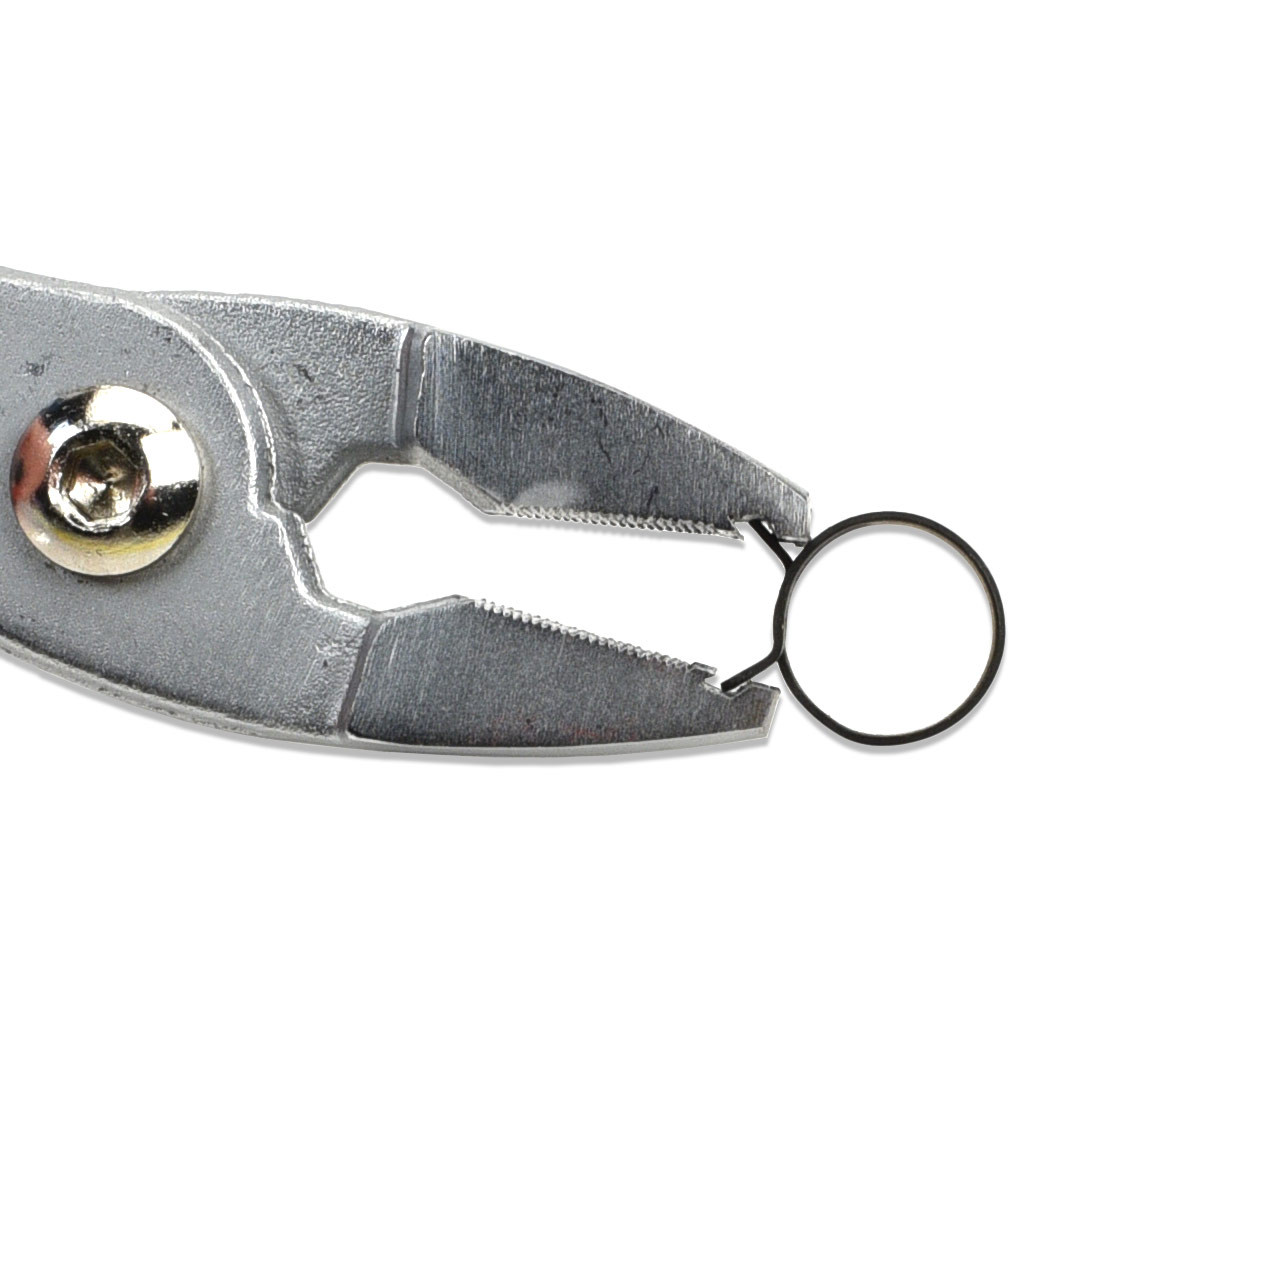 IAG Multi-Directional Hose Clamp Pliers - Clamp Holding